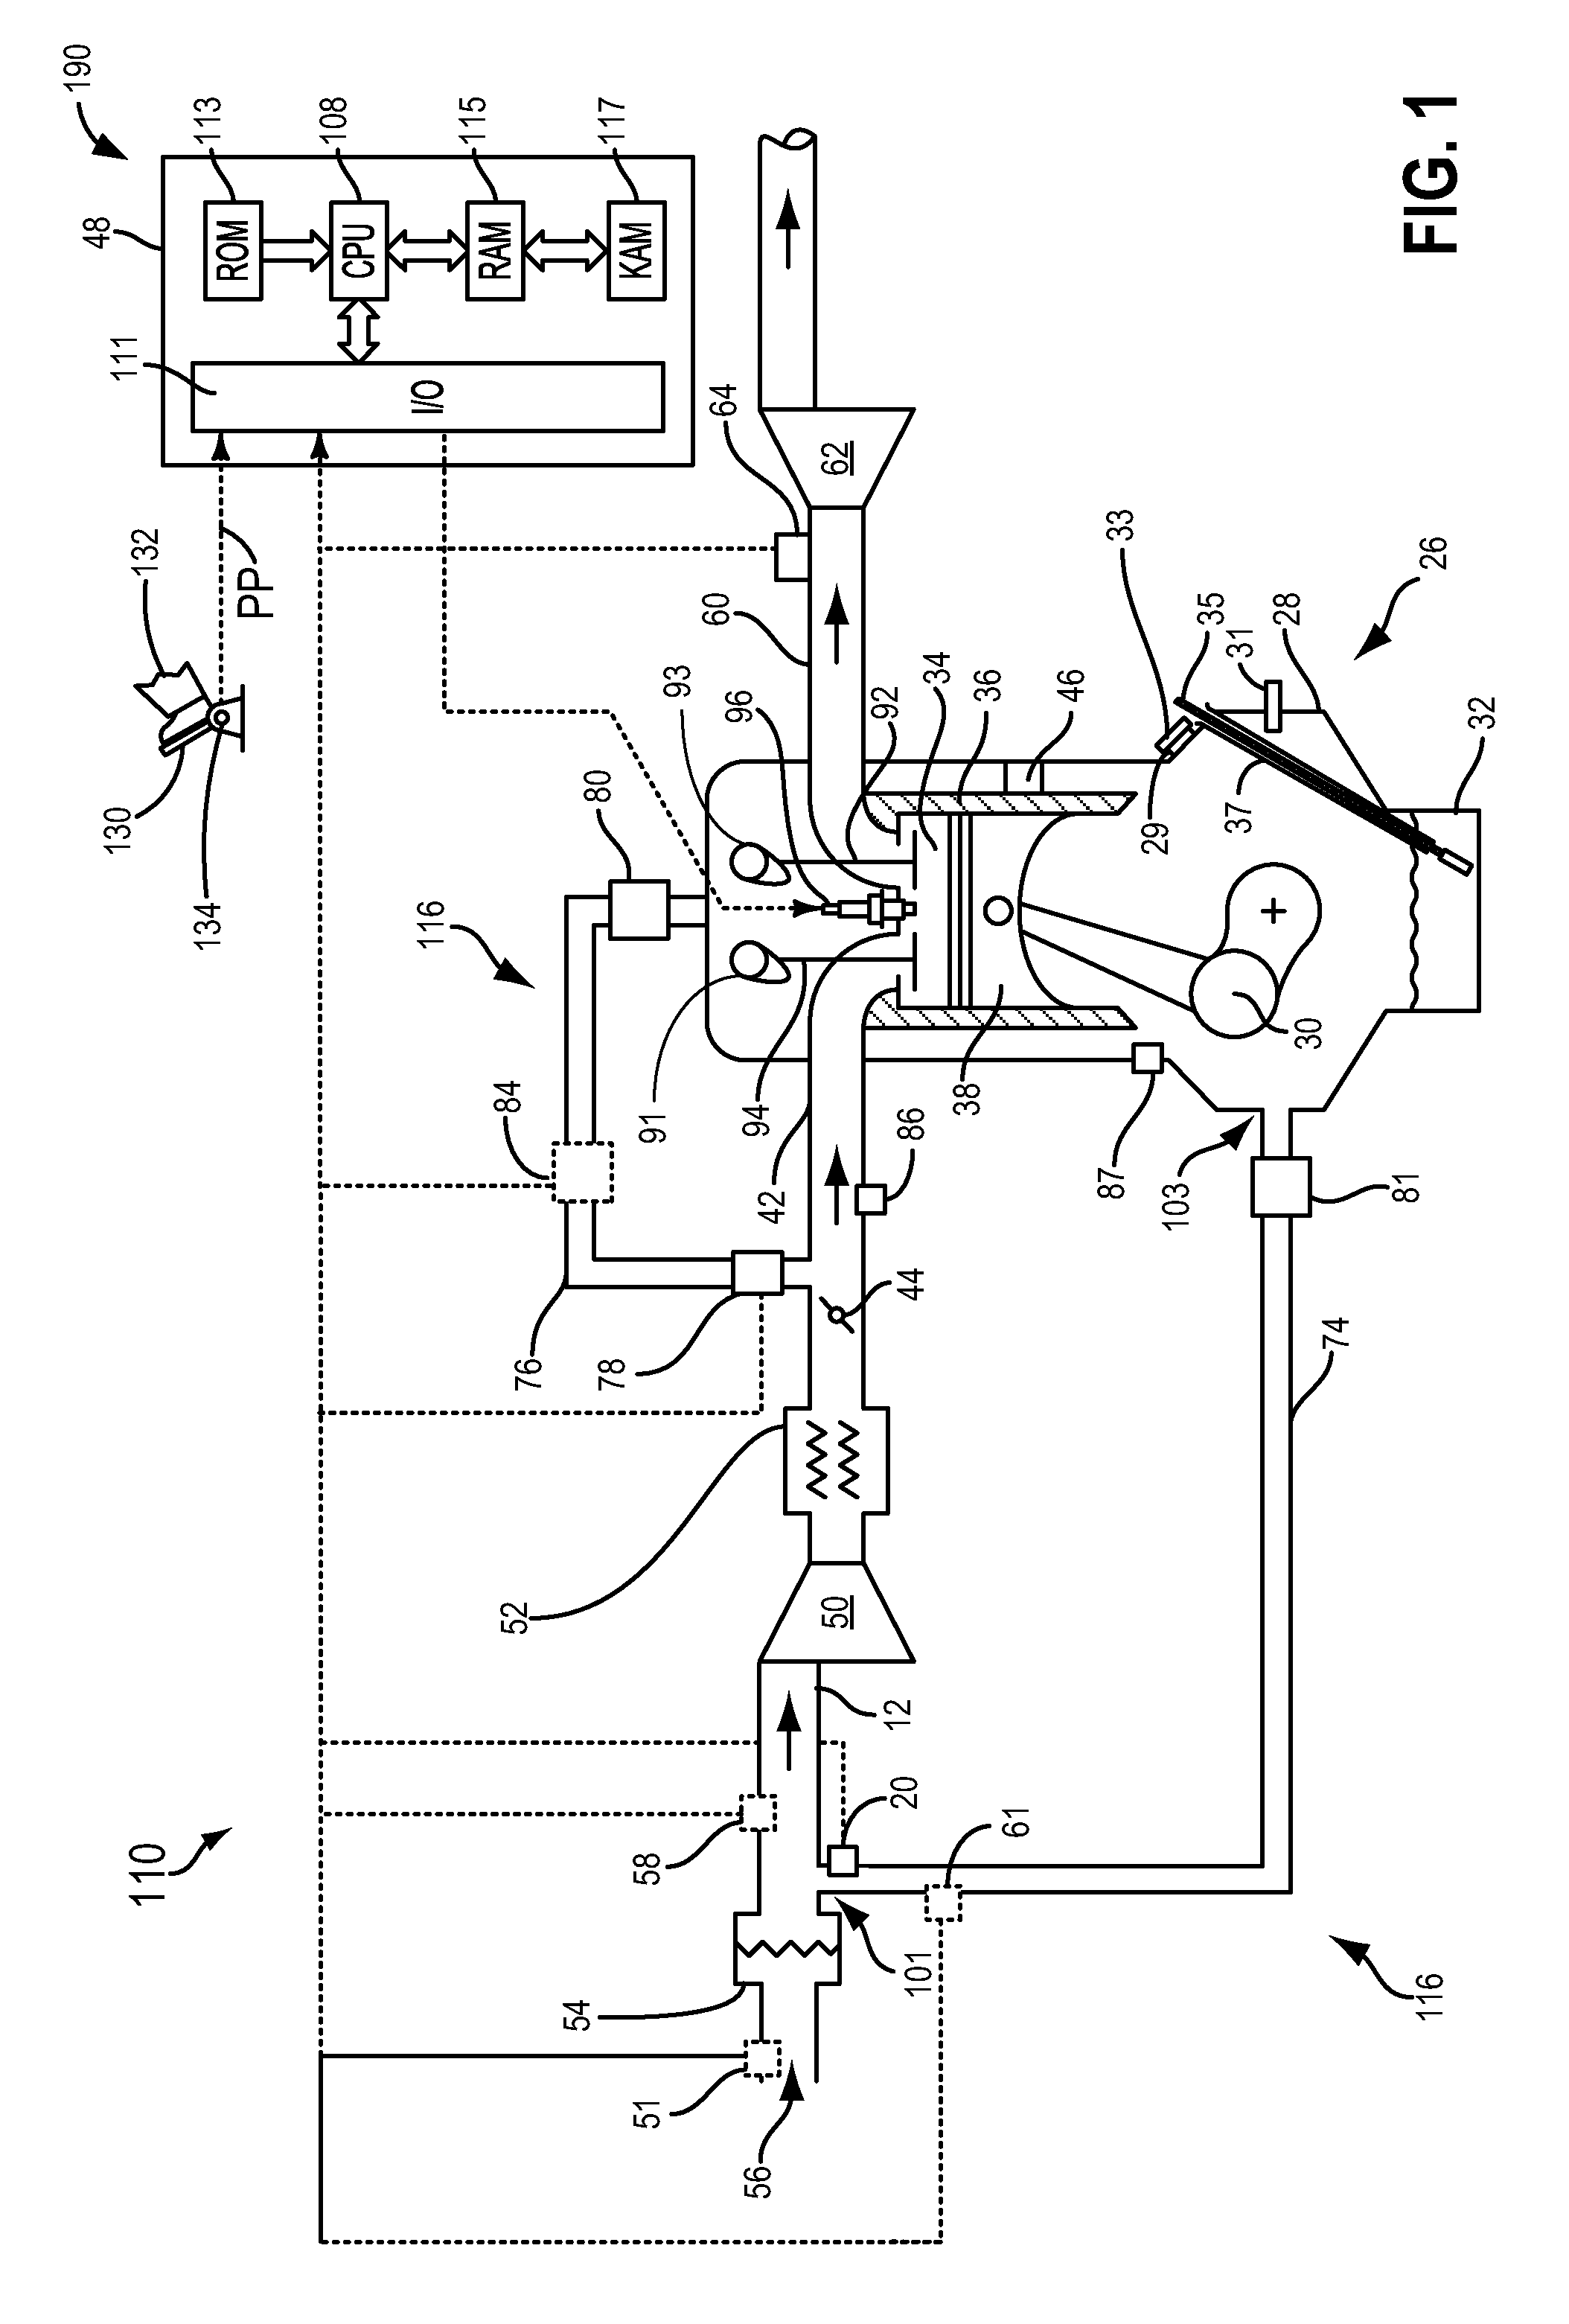 System and method for reducing engine oil dilution